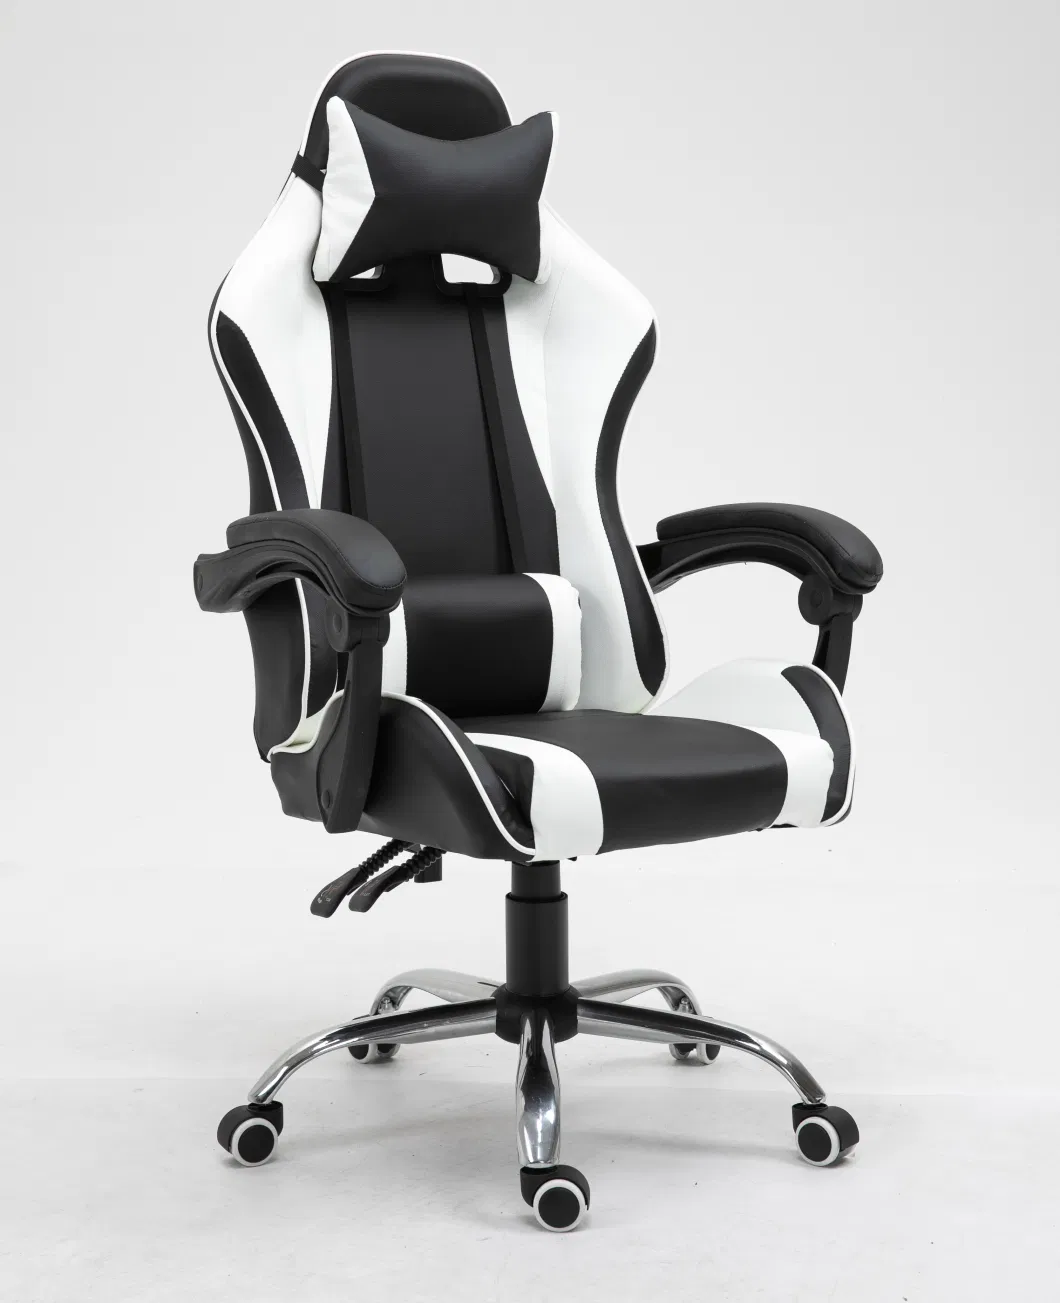 Blue Gaming Chair Best Seller Linkage Armrests Reclining Racing Chair with Footrest